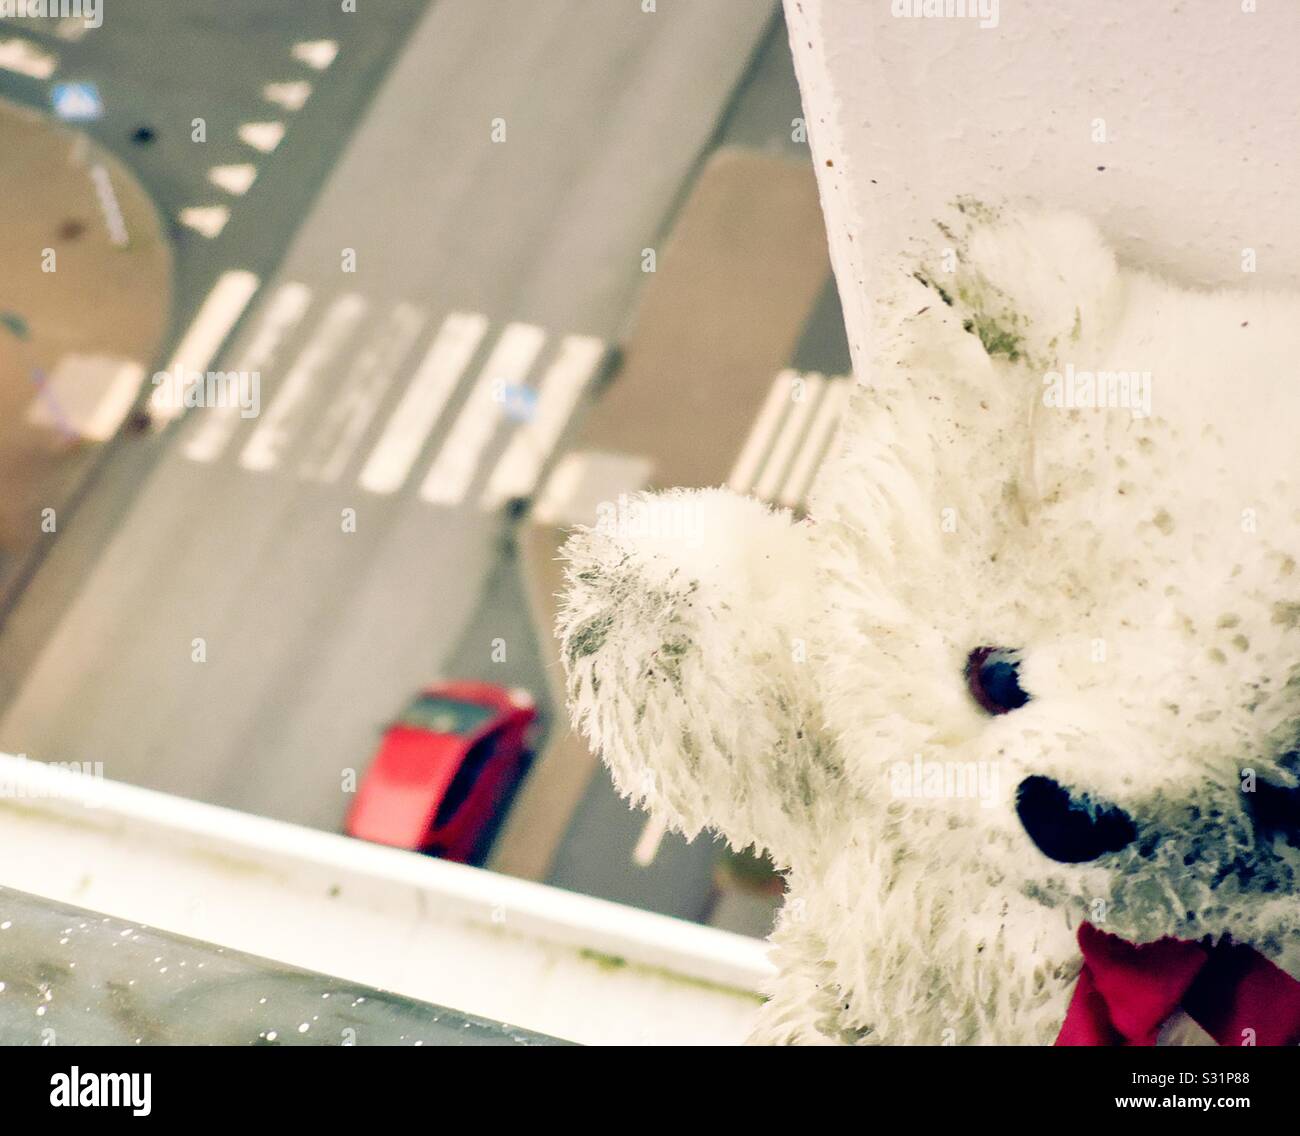 Teddy bear on ledge of highrise building with road, pedestrian crossing and red car far below Stock Photo